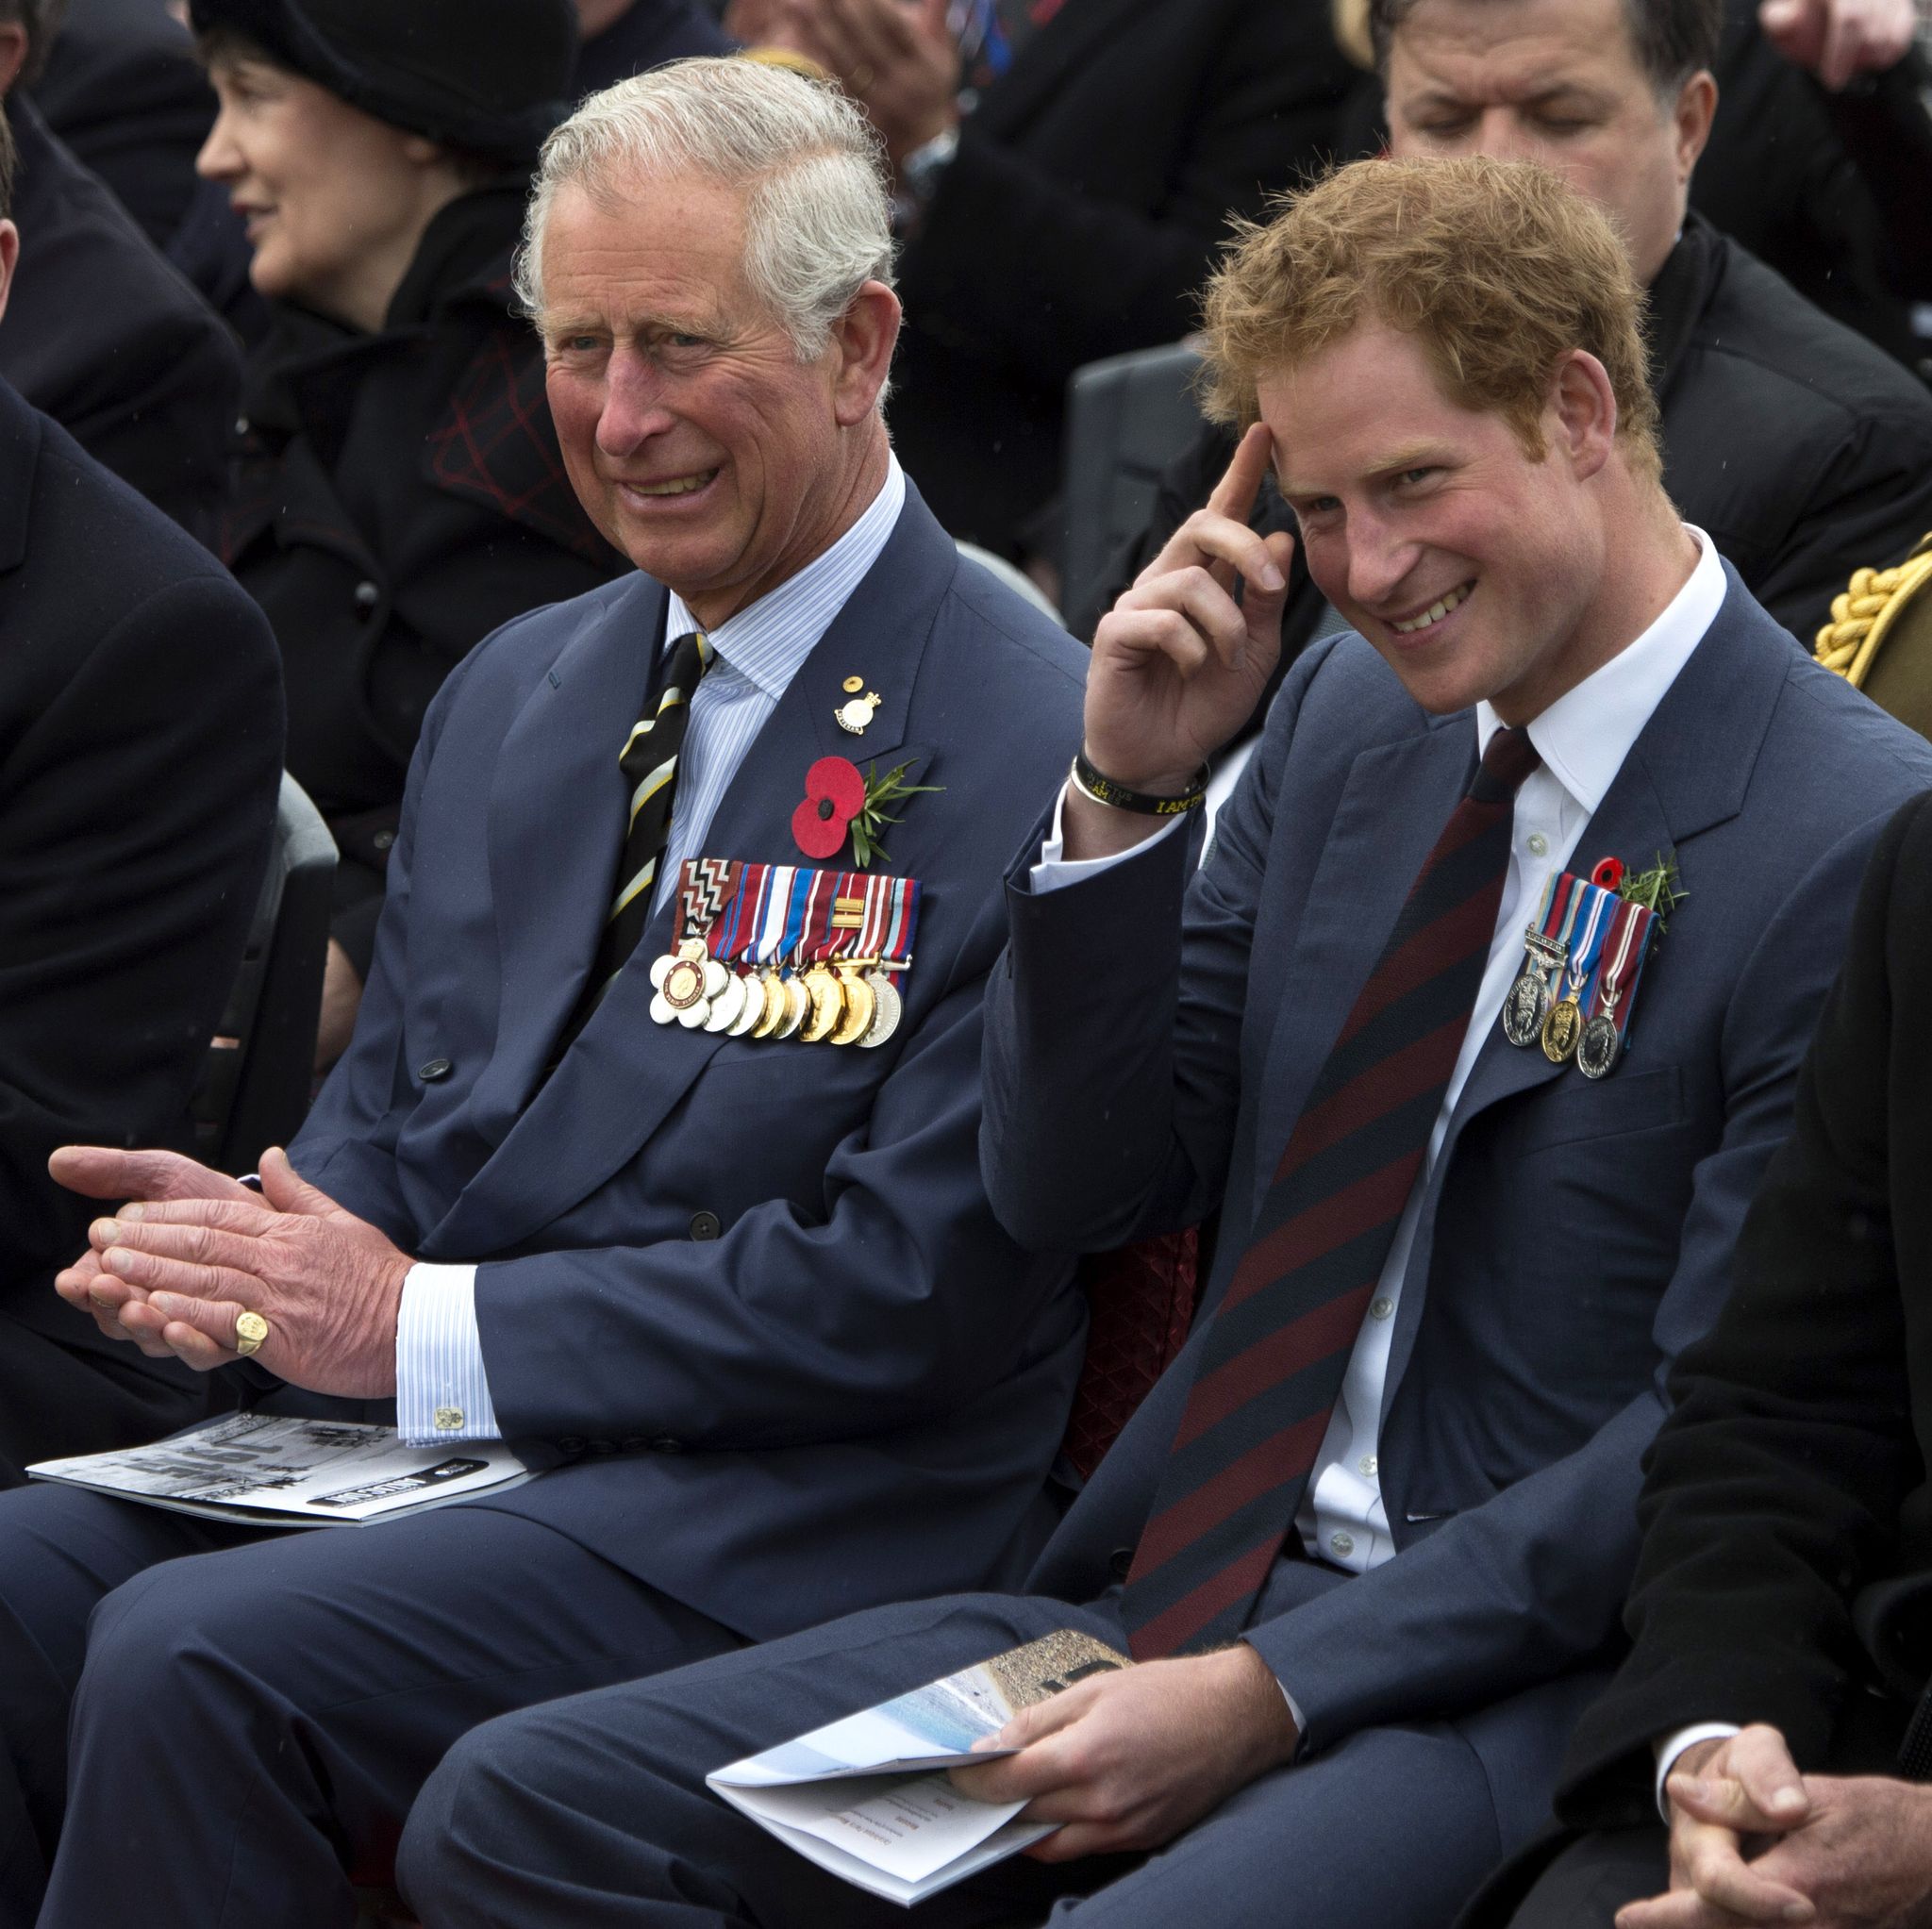 eceabat, turkey   april 25  prince charles, prince of wales and prince harry attend the new zealand memorial service marking the centenary of the world war one gallipoli campaign at chunuk bair held on april 25, 2015 in eceabat, turkey turkish and allied powers representatives, as well as family members of those who served, are commemorating the 100th anniversary of the gallipoli campaign with ceremonies at memorials across the gallipoli peninsula the gallipoli land campaign, in which a combined allied force of british, french, australian, new zealand and indian troops sought to occupy the gallipoli peninsula and the strategic dardanelles strait during world war i, began on april 25, 1915 against turkish forces of the ottoman empire the allies, unable to advance more than a few kilometers, withdrew after eight months the campaign cost the allies approximately 50,000 killed and up to 200,000 wounded, the ottomans approximately 85,000 killed and 160,000 wounded  photo by paul edwards   pool getty images